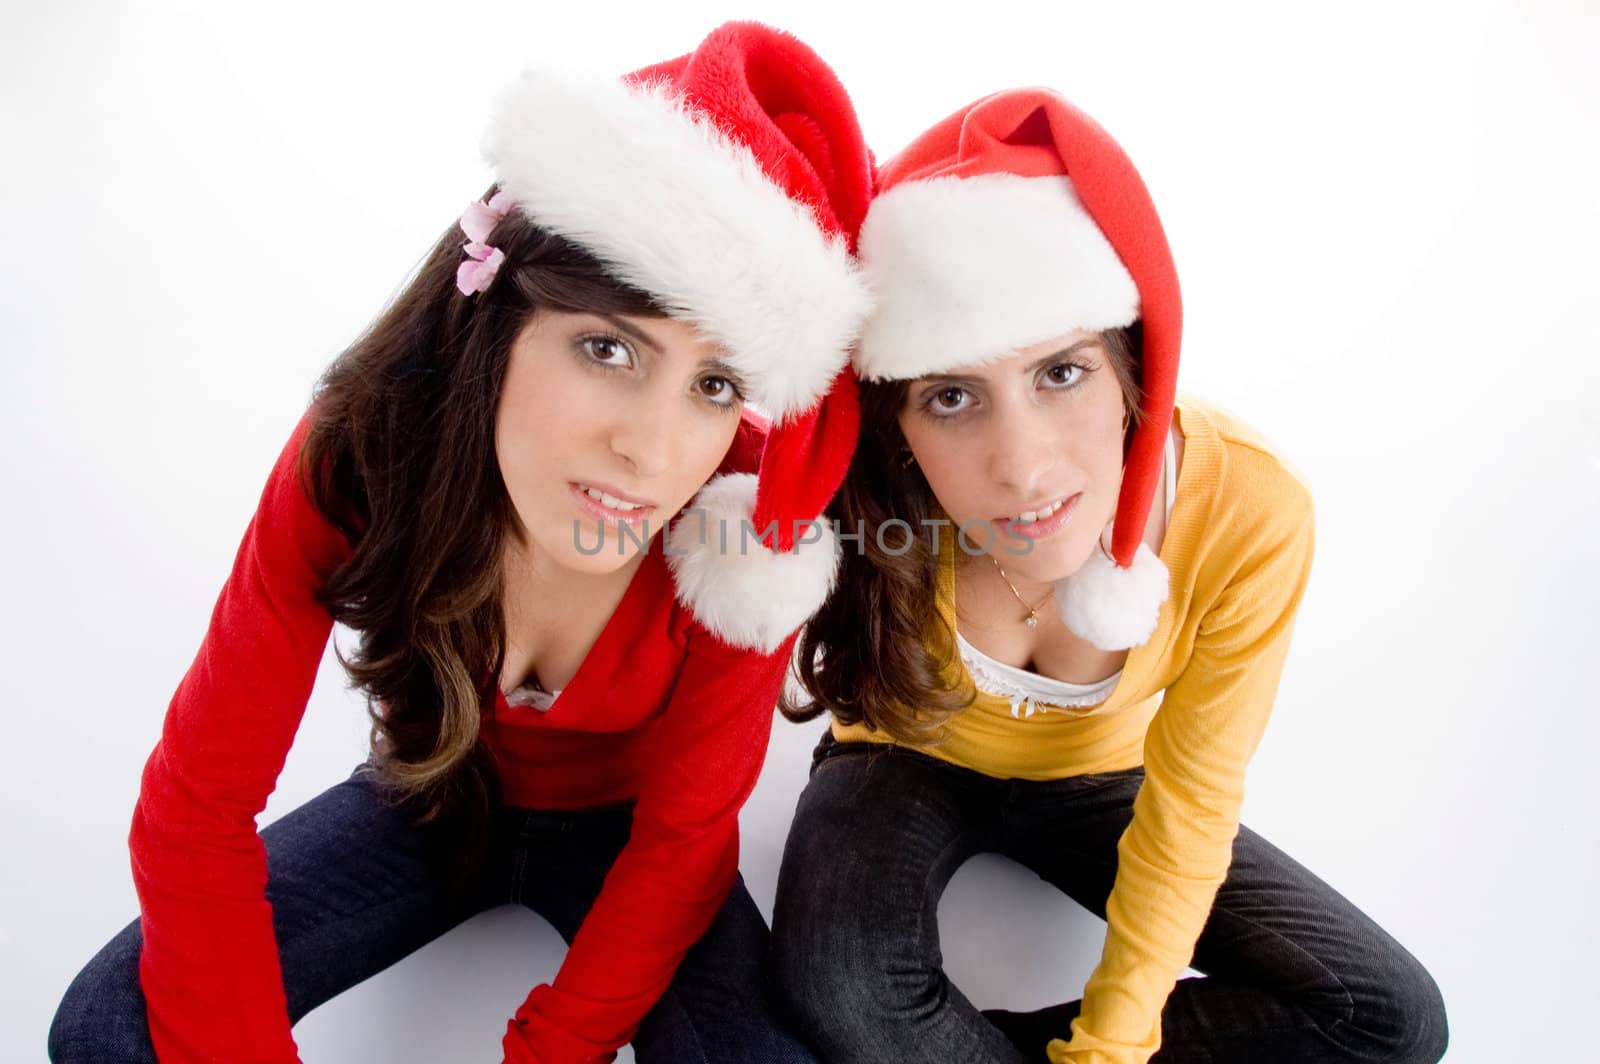 sitting females with christmas hat by imagerymajestic